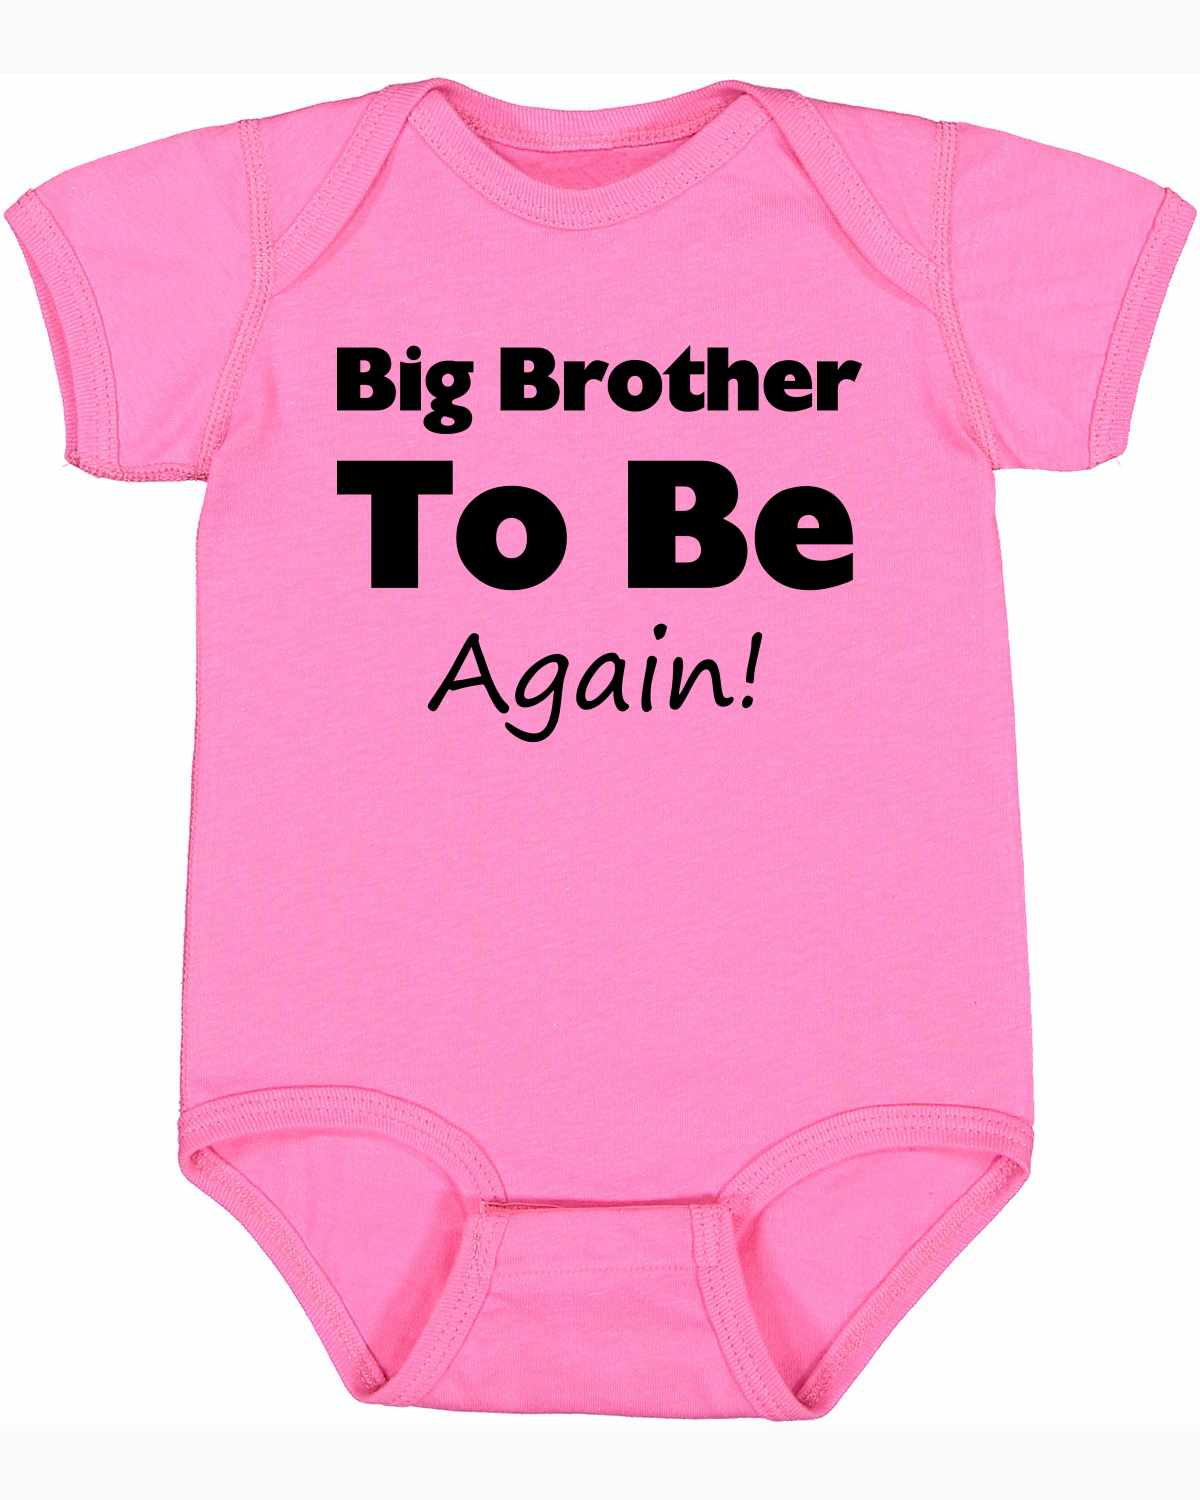 Big Brother To Be Again on Infant BodySuit (#864-10)